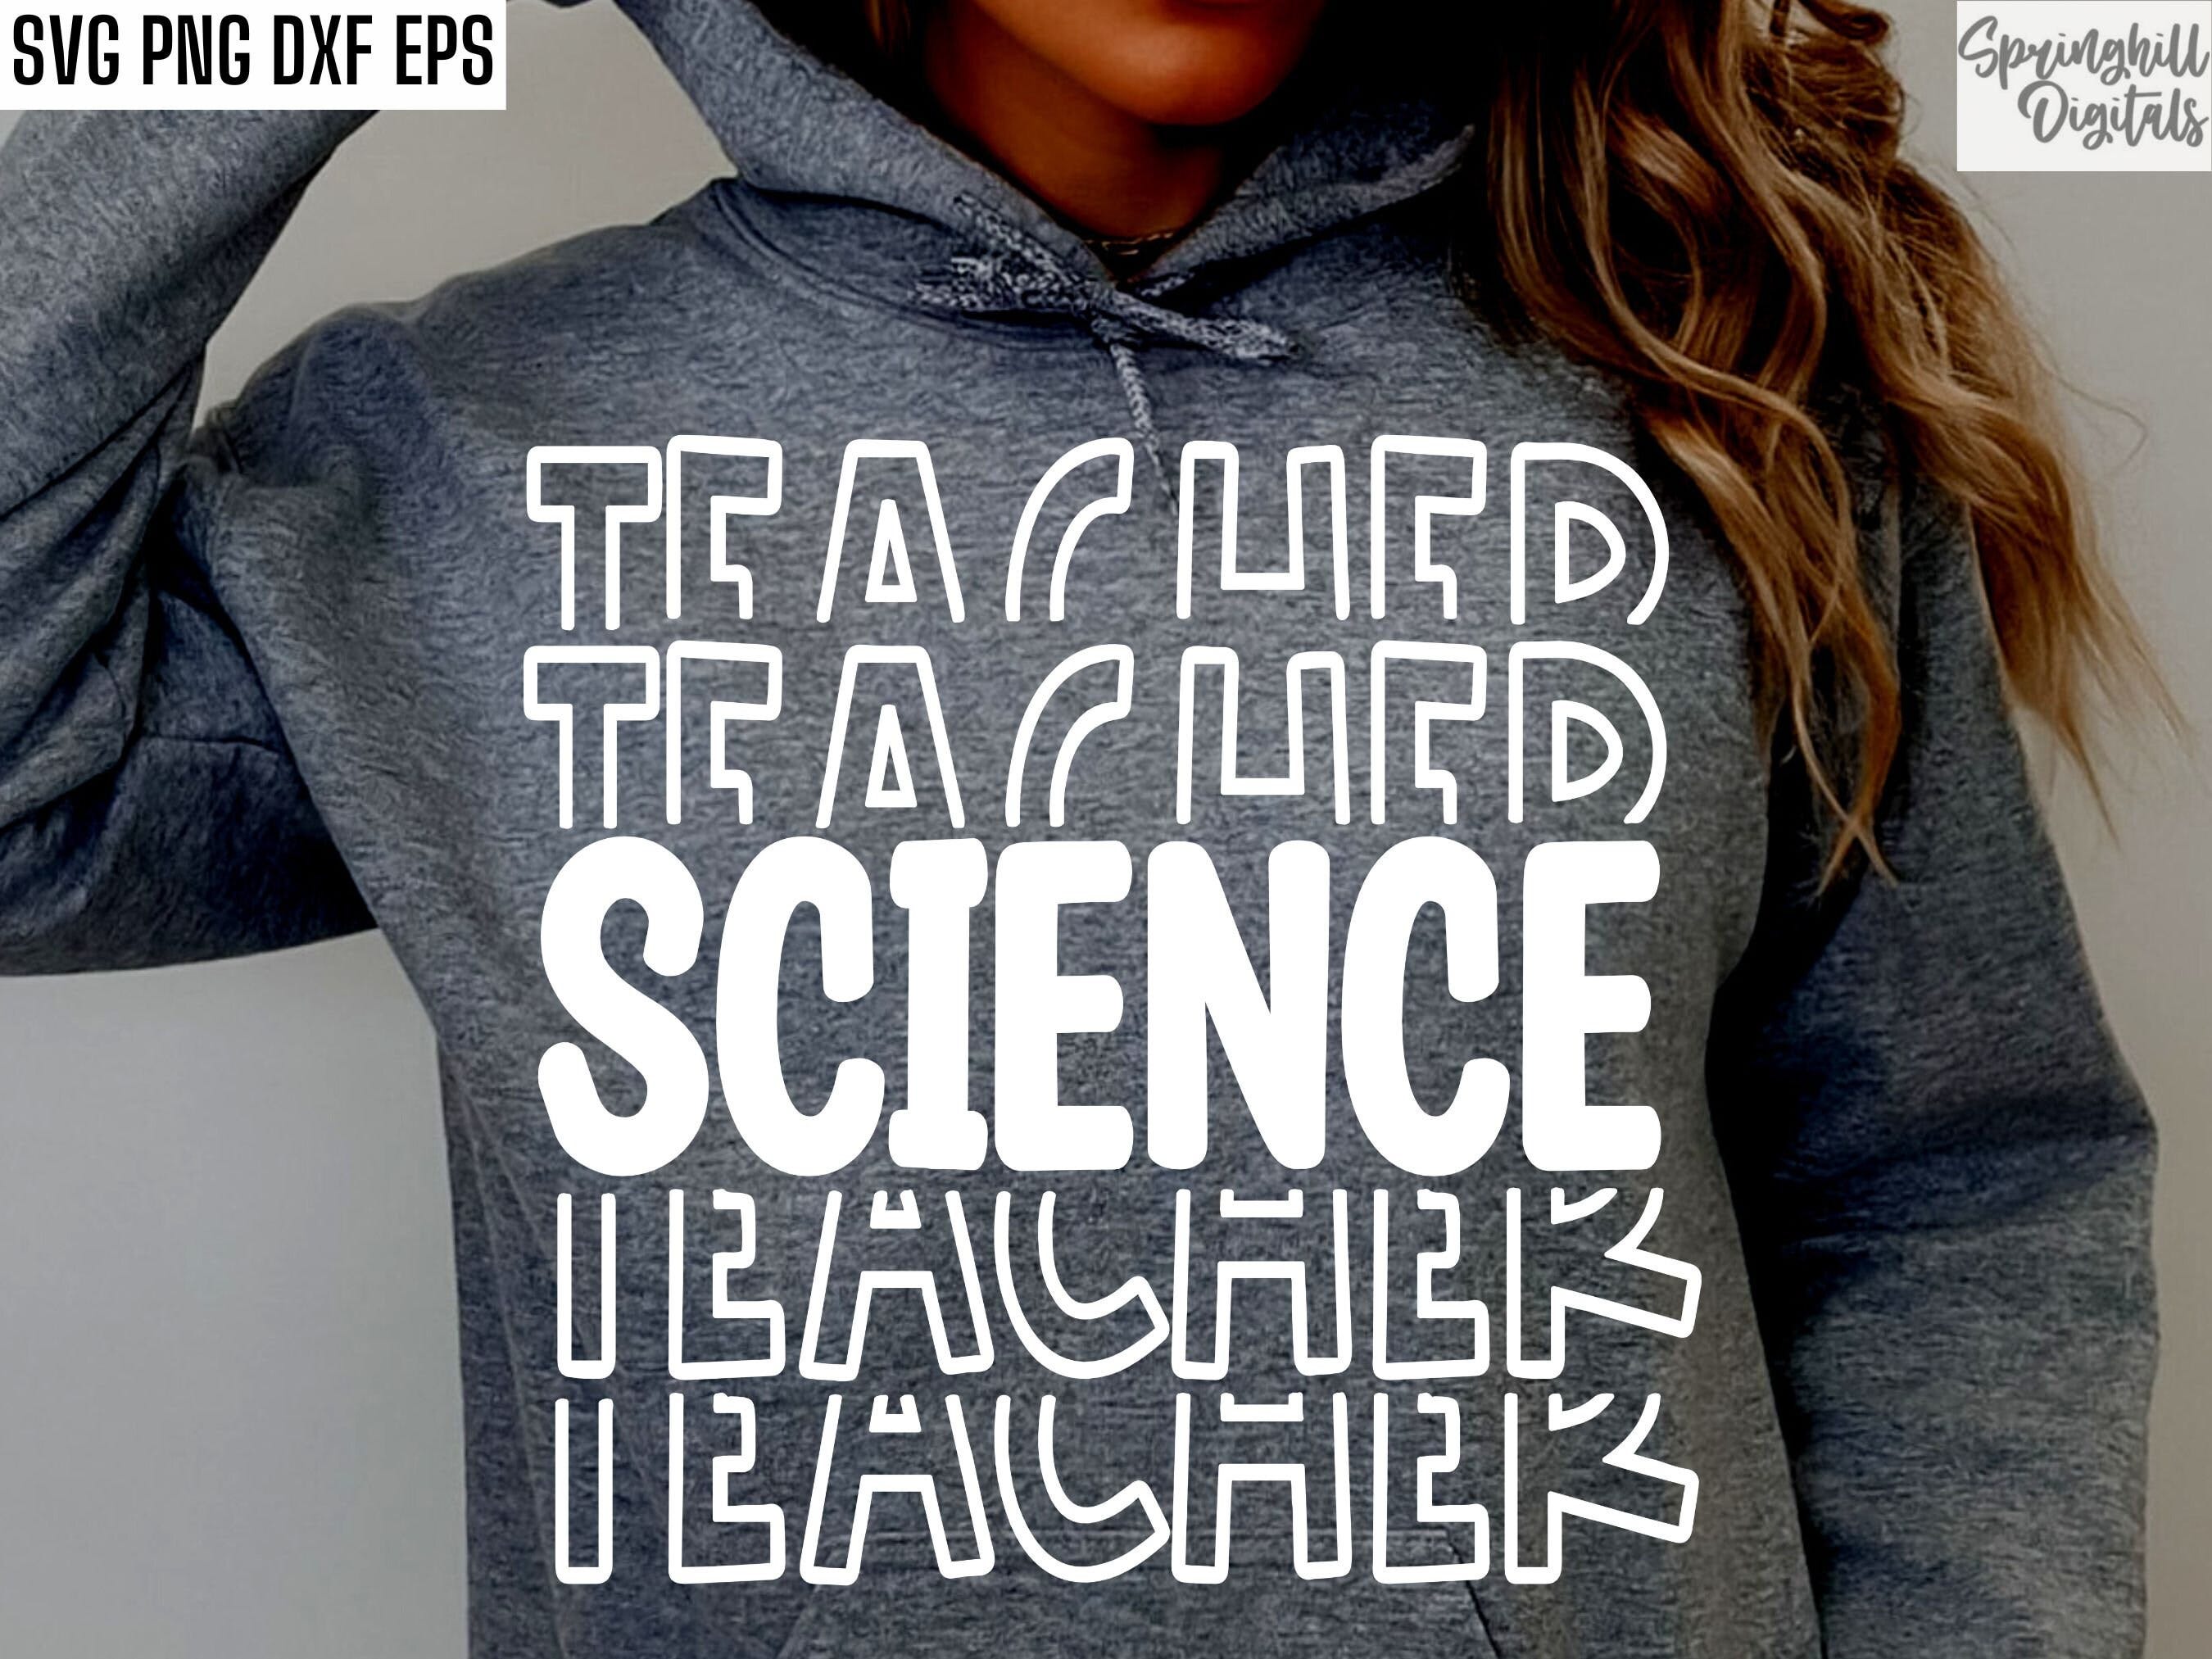 Science Teacher Svgs | Back To School Shirt | Elementary School Svgs | Teaching Cut Files | First Day Of School | Biology Designs | Pngs